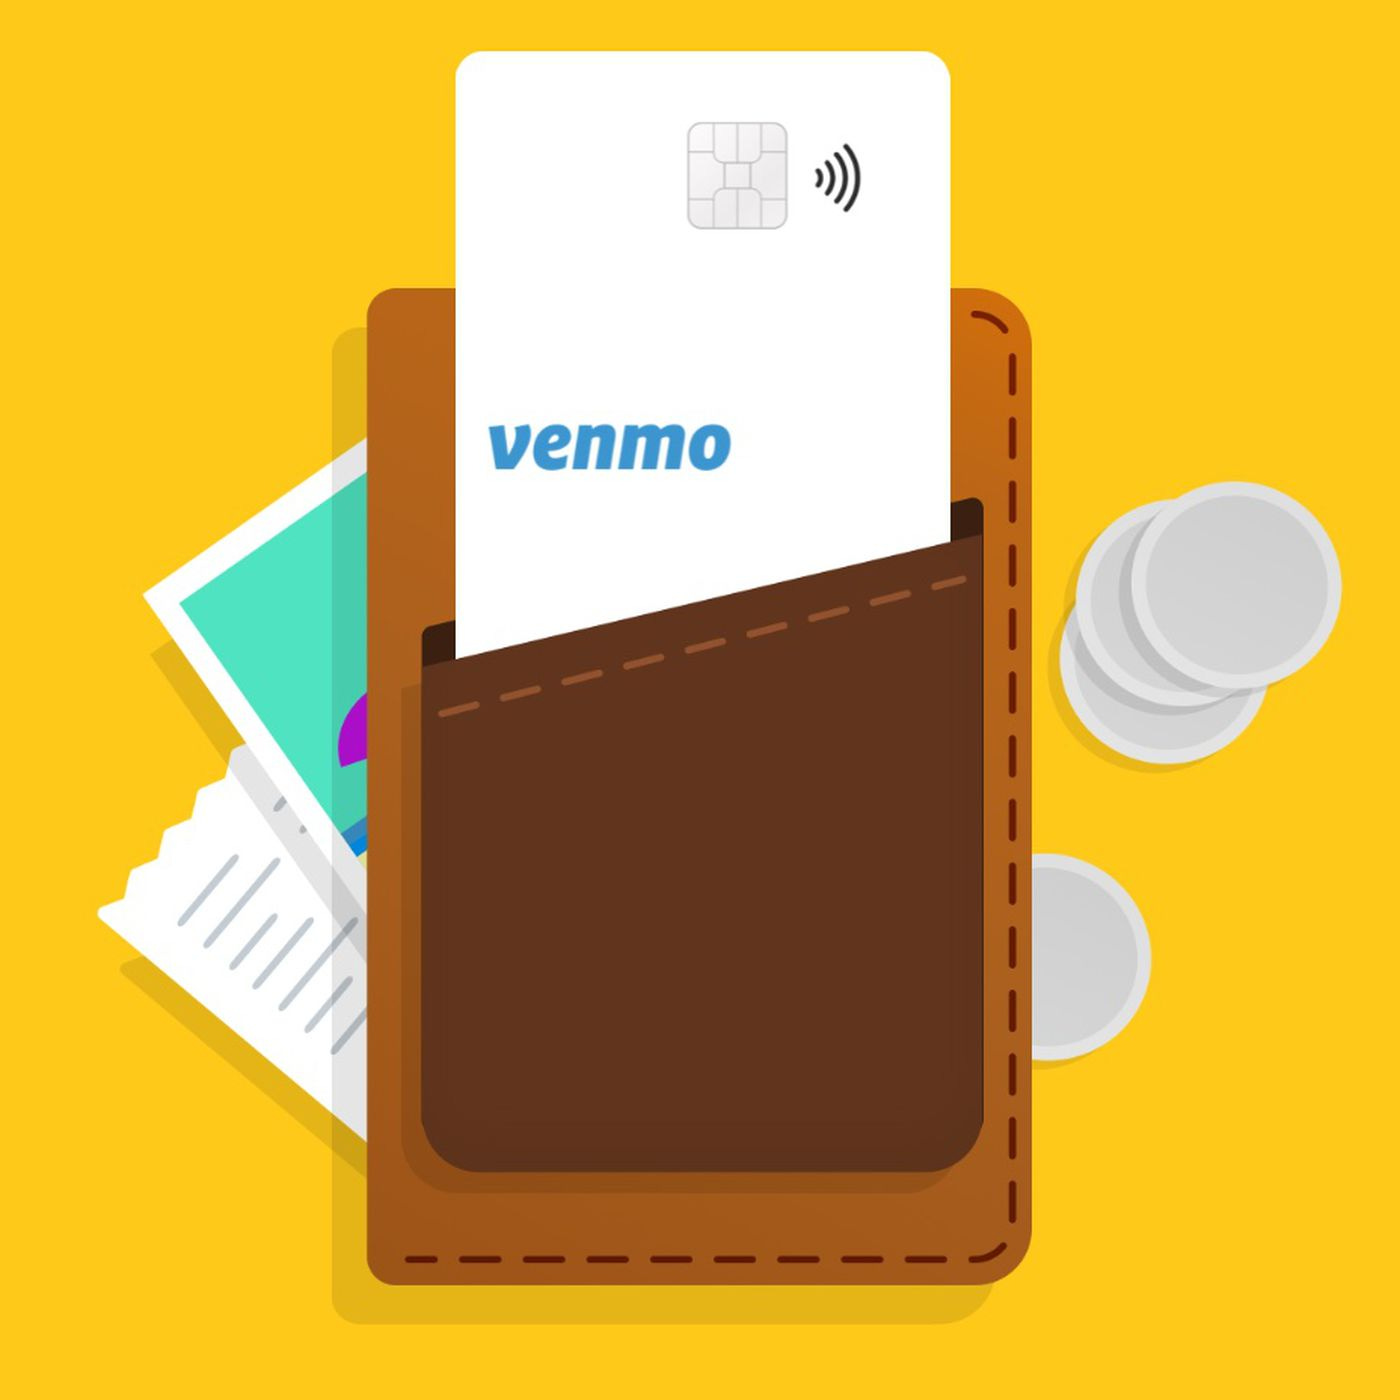 Venmo is officially launching its physical debit card - The Verge